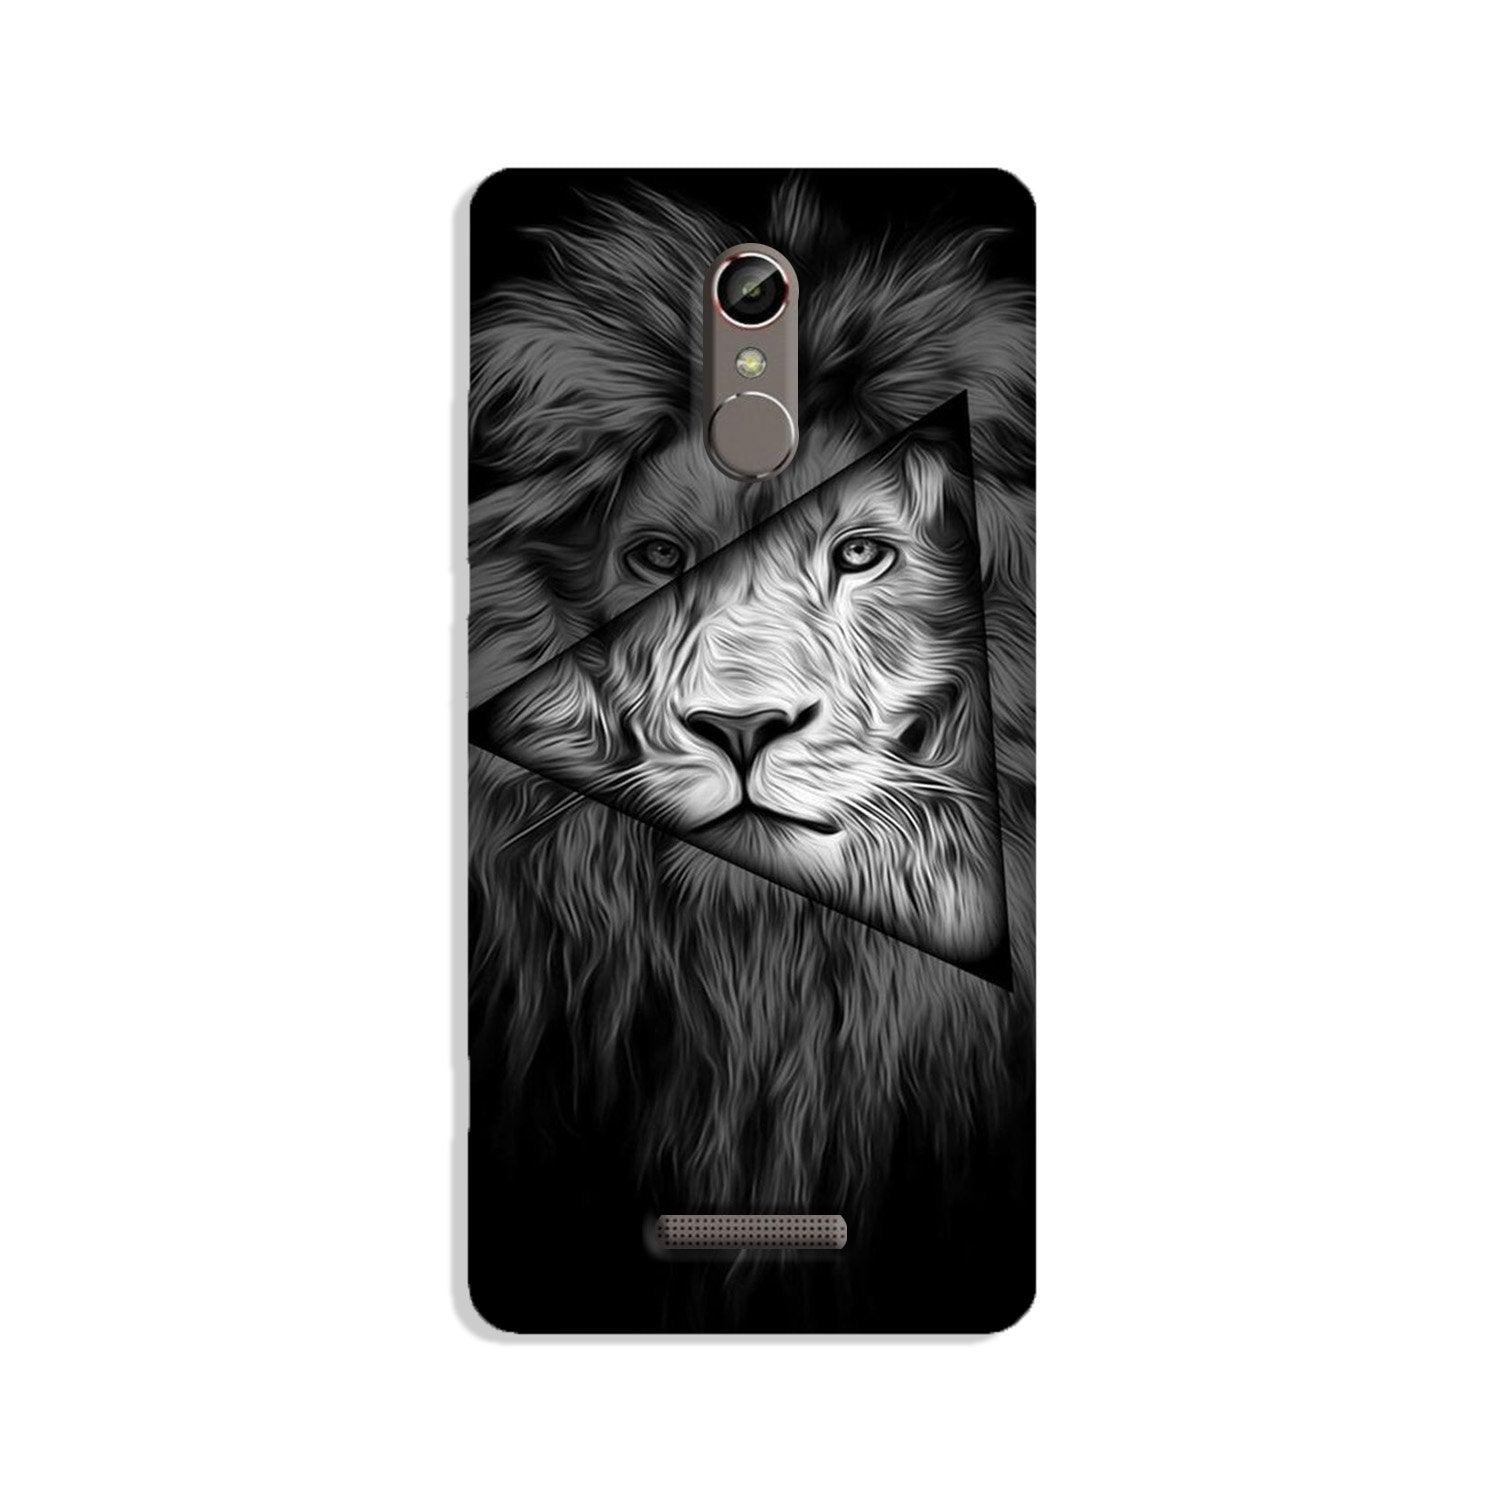 Lion Star Case for Gionee S6s (Design No. 226)